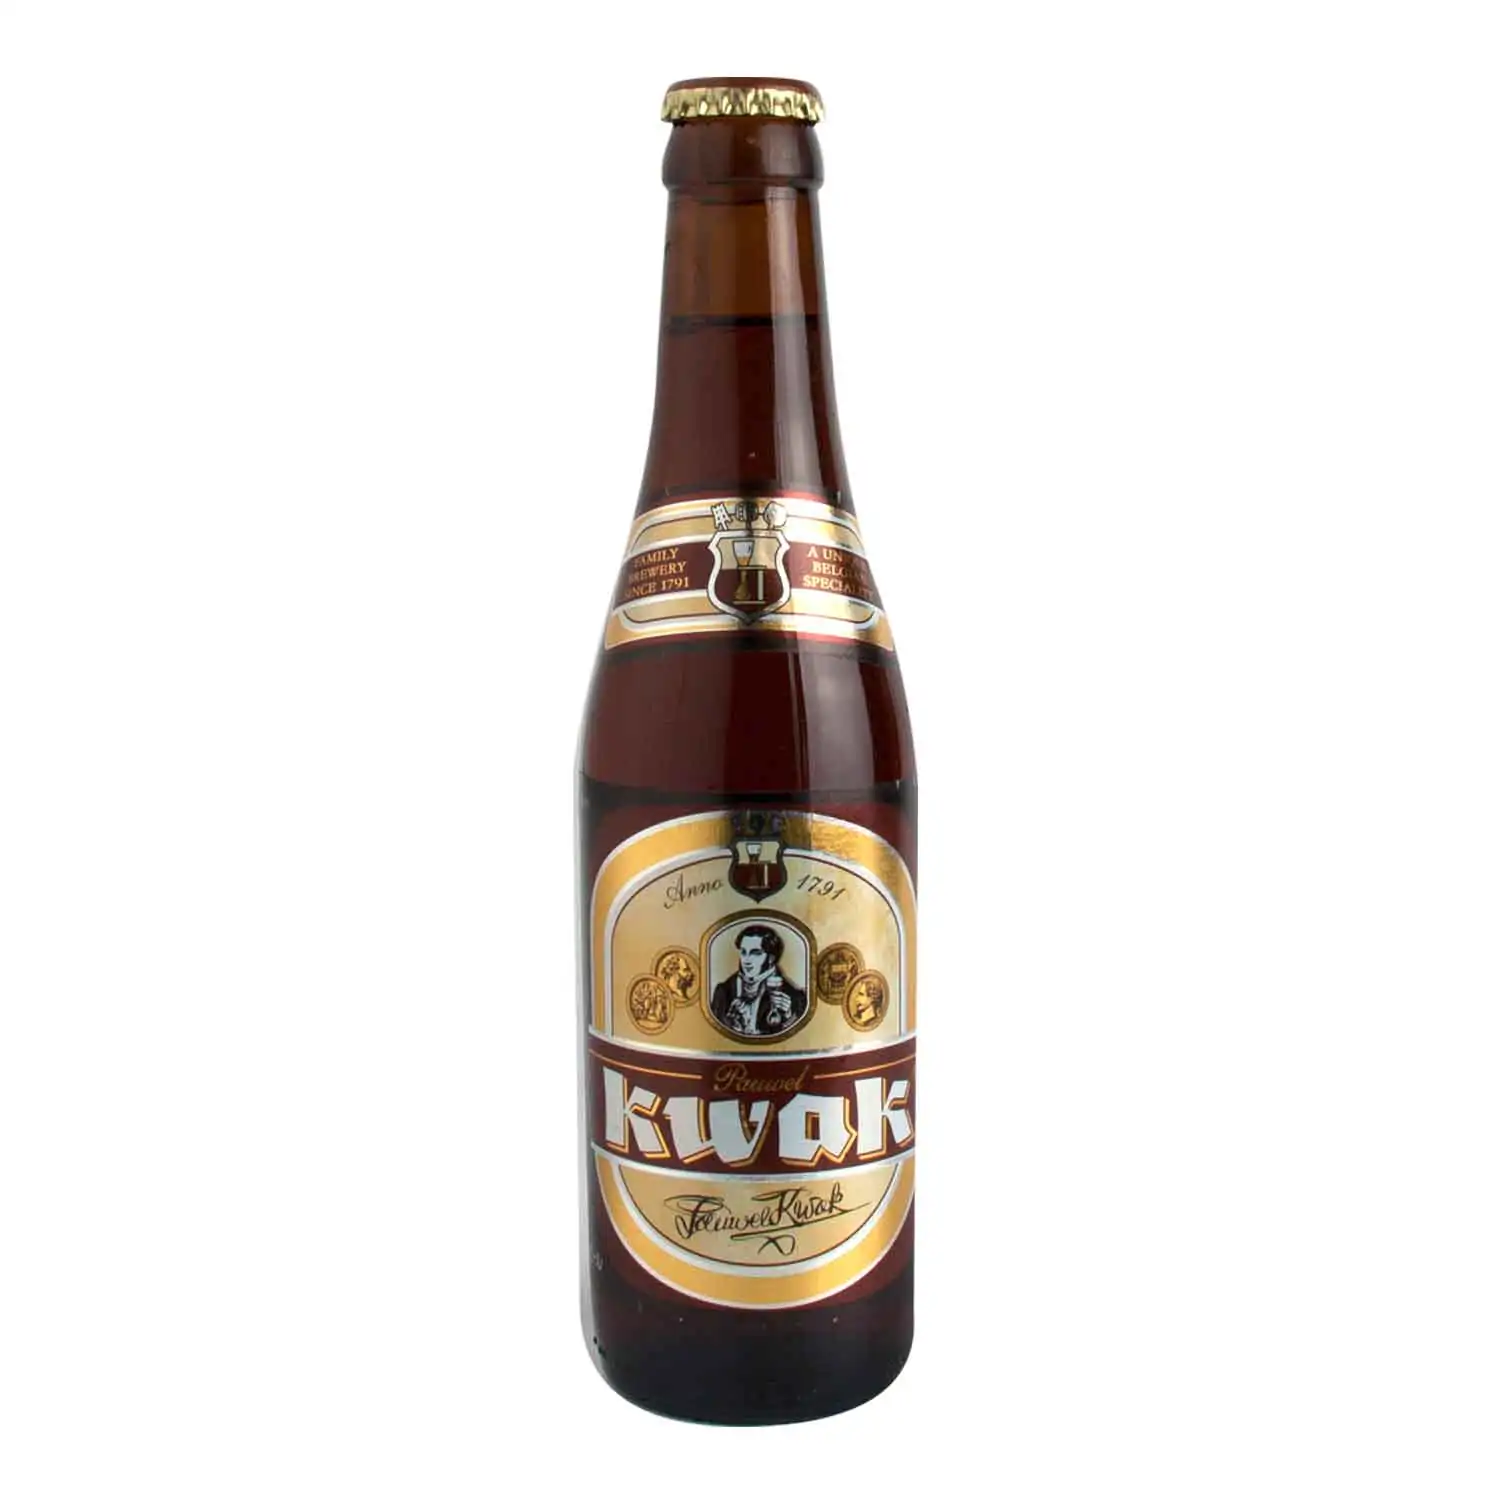 Kwak ambrée 33cl Alc 8,4% - Buy at Real Tobacco